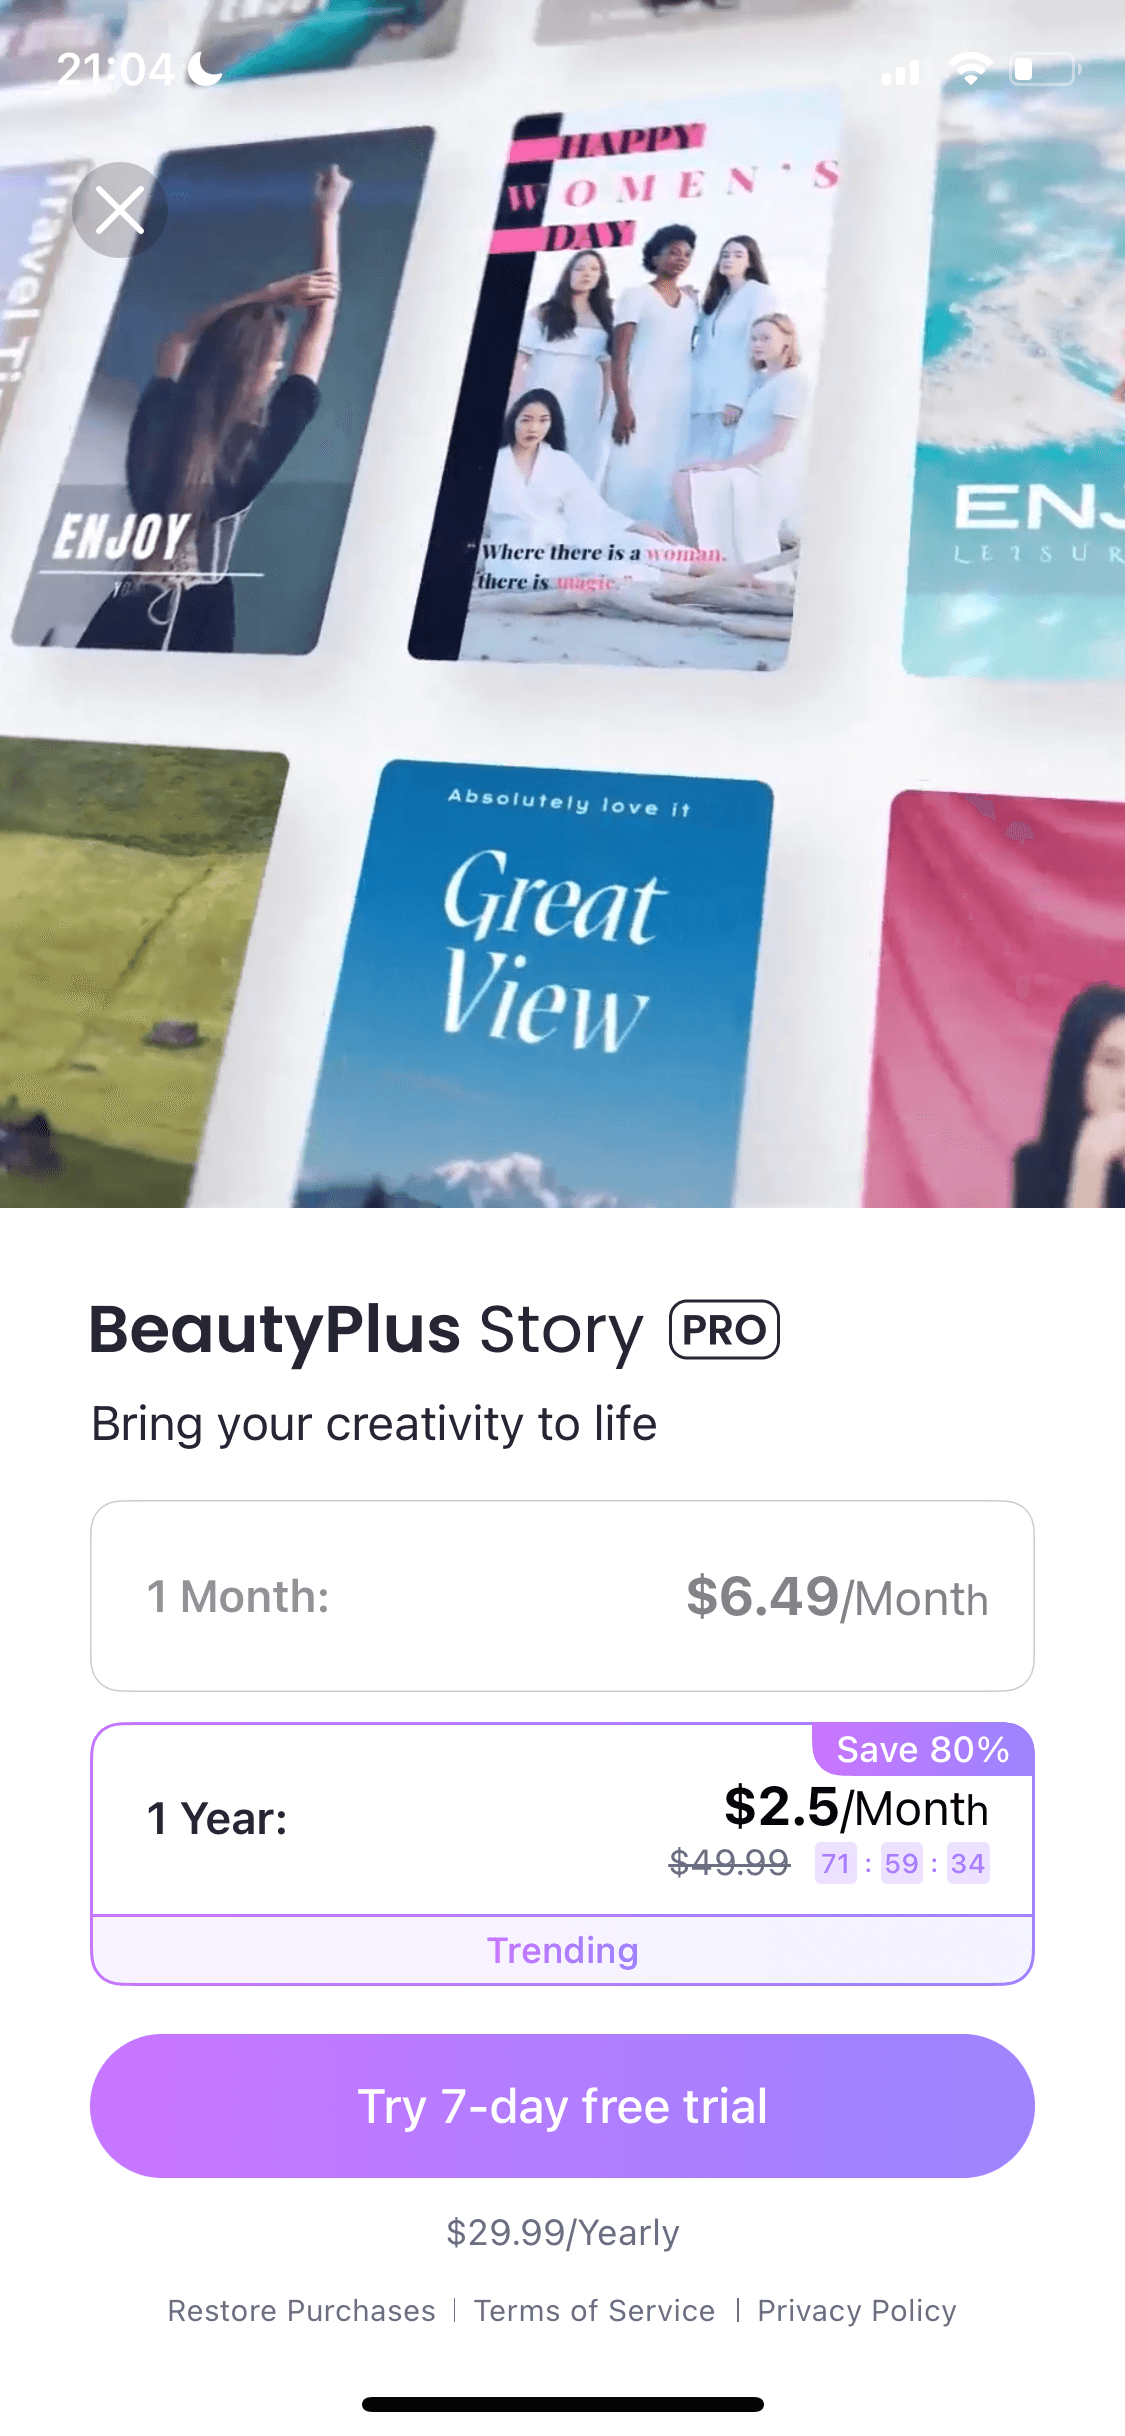 beauty plus — mobile paywall example by the app from Photo&Video category